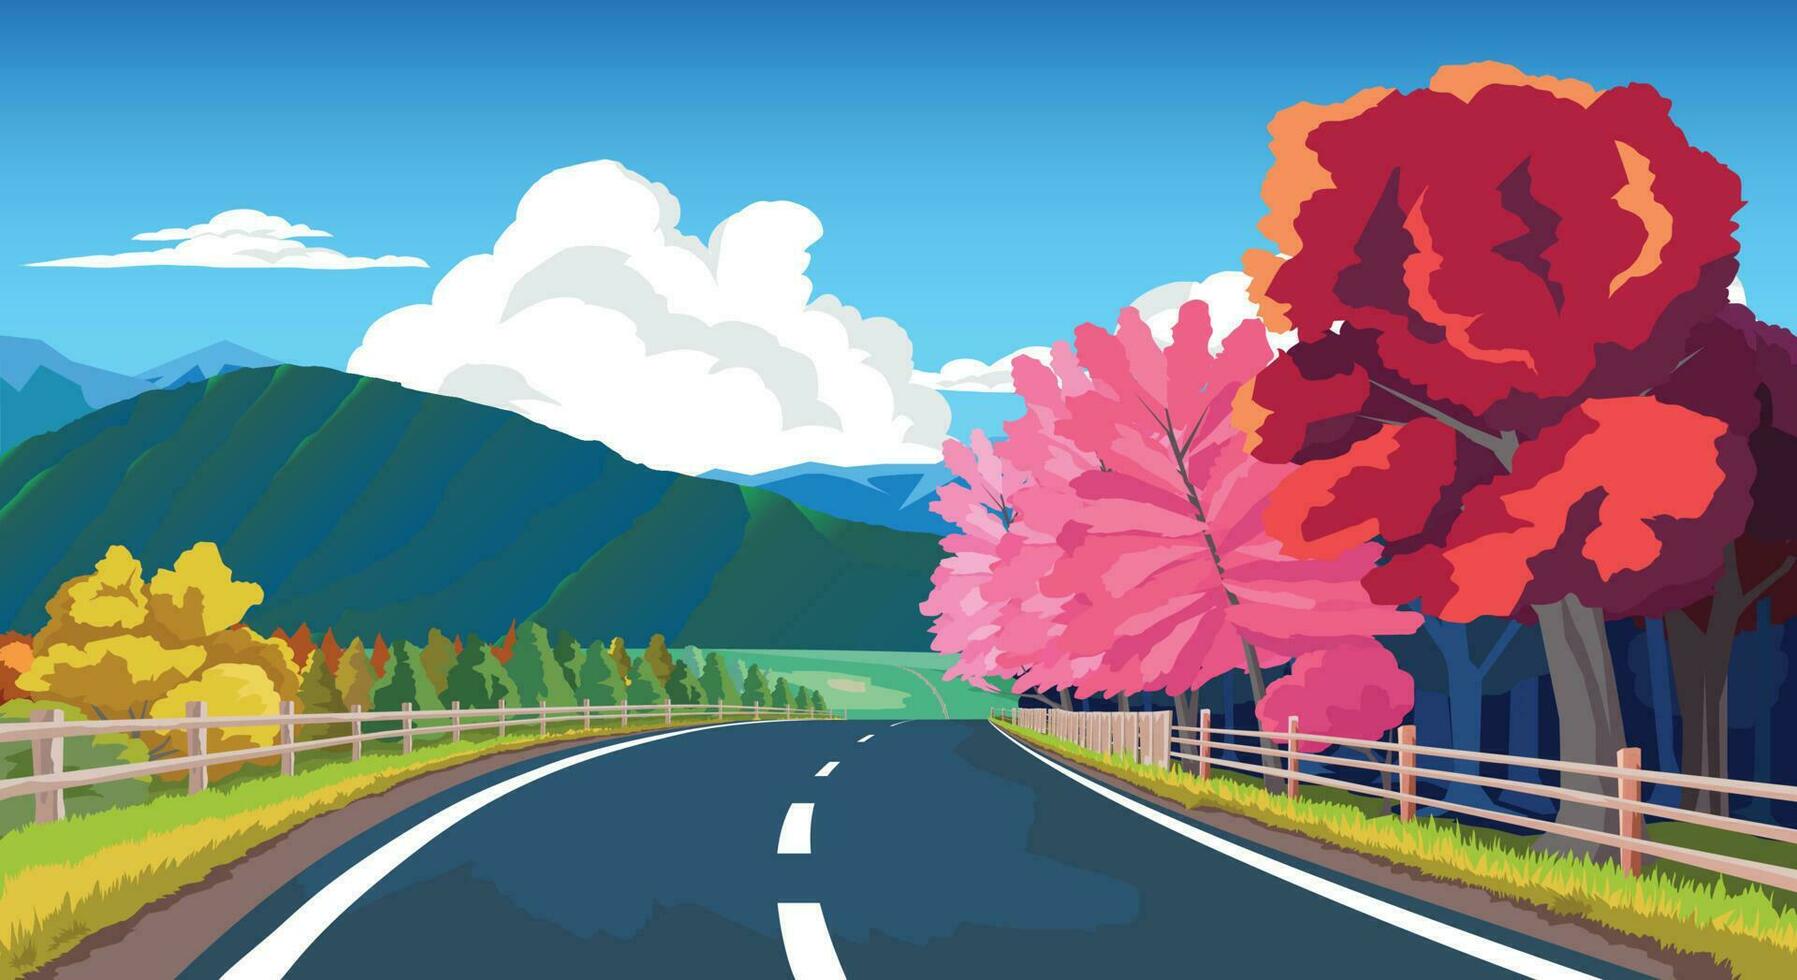 Copy Space Flat Vector Illustration. of curved asphalt road path and environment of wide open fields of spring. Colorful trees along the way and there is a wooden fence. Big mountain under blue sky.